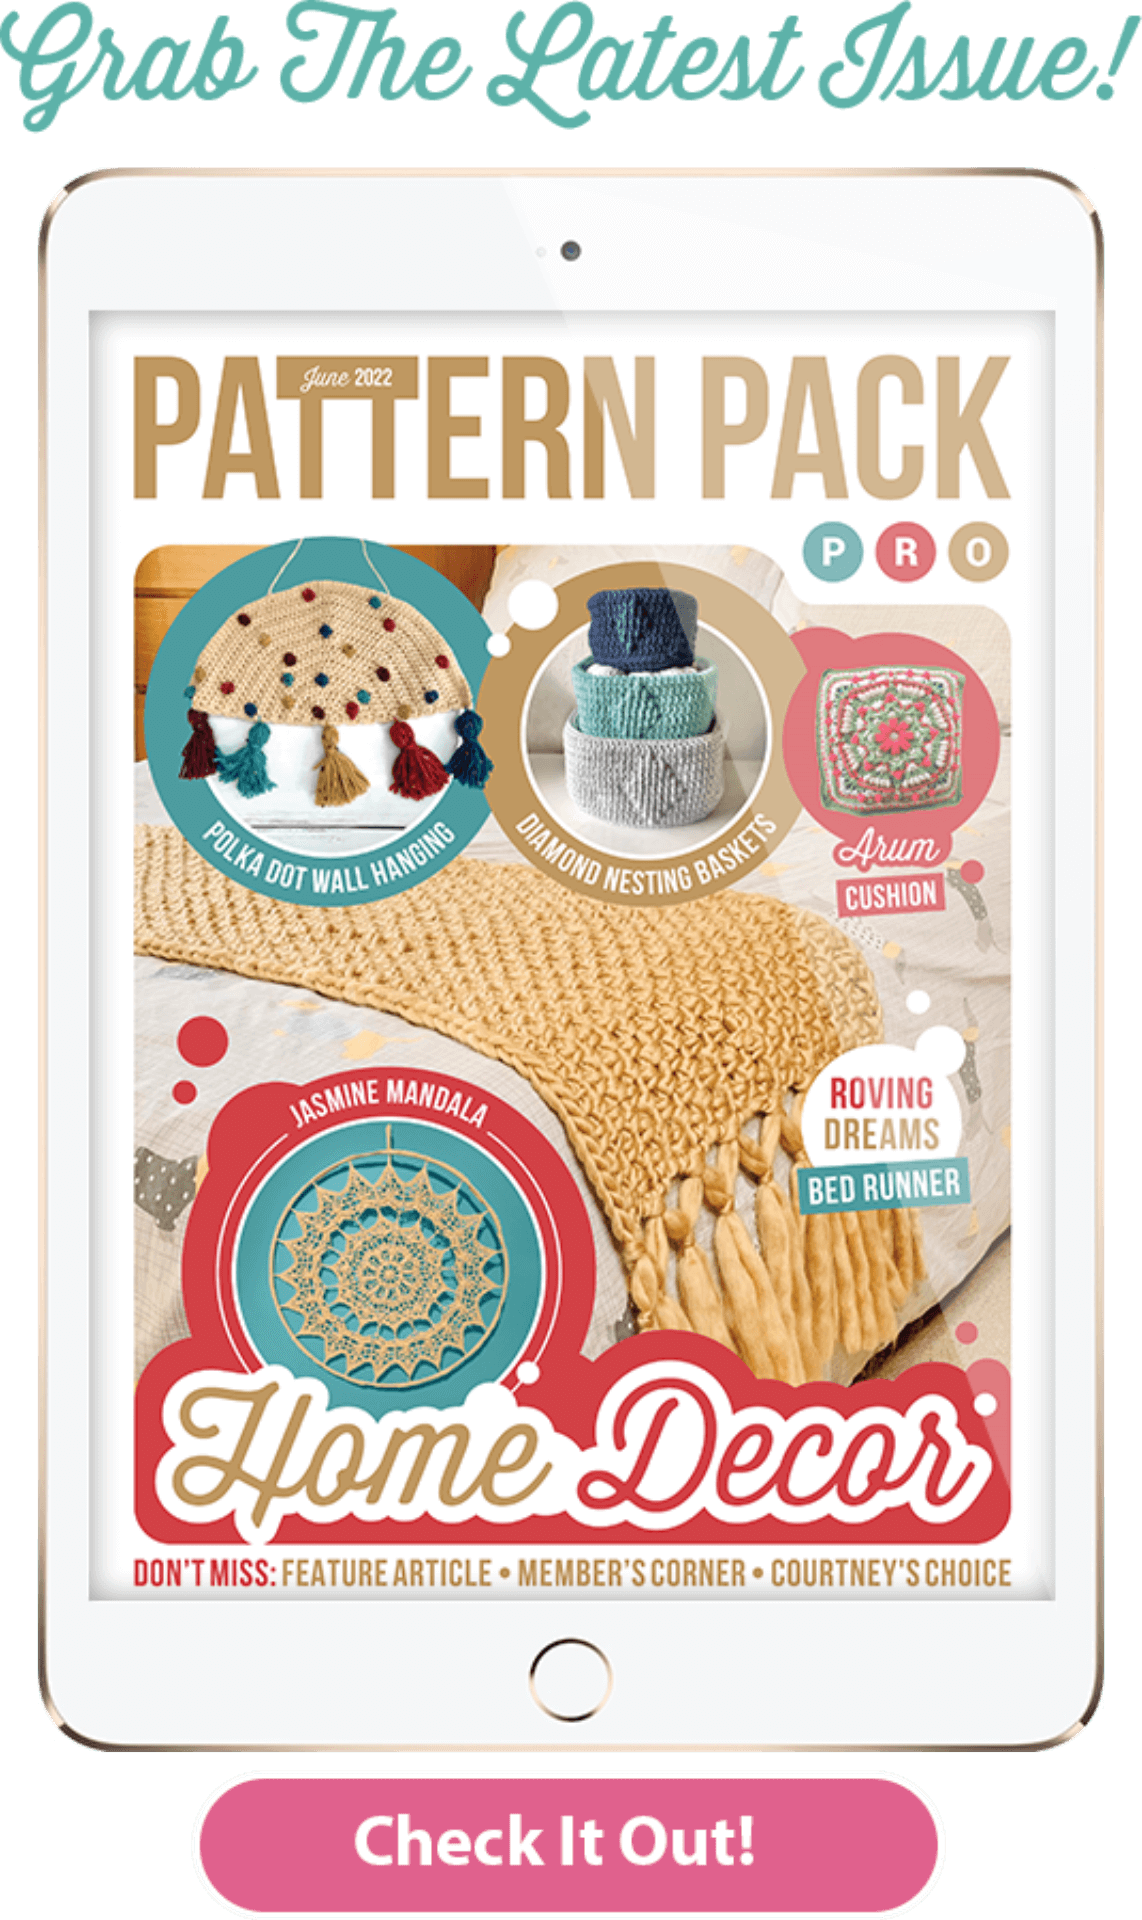 Home Decor in the June 2022 issue of Pattern Pack Pro!